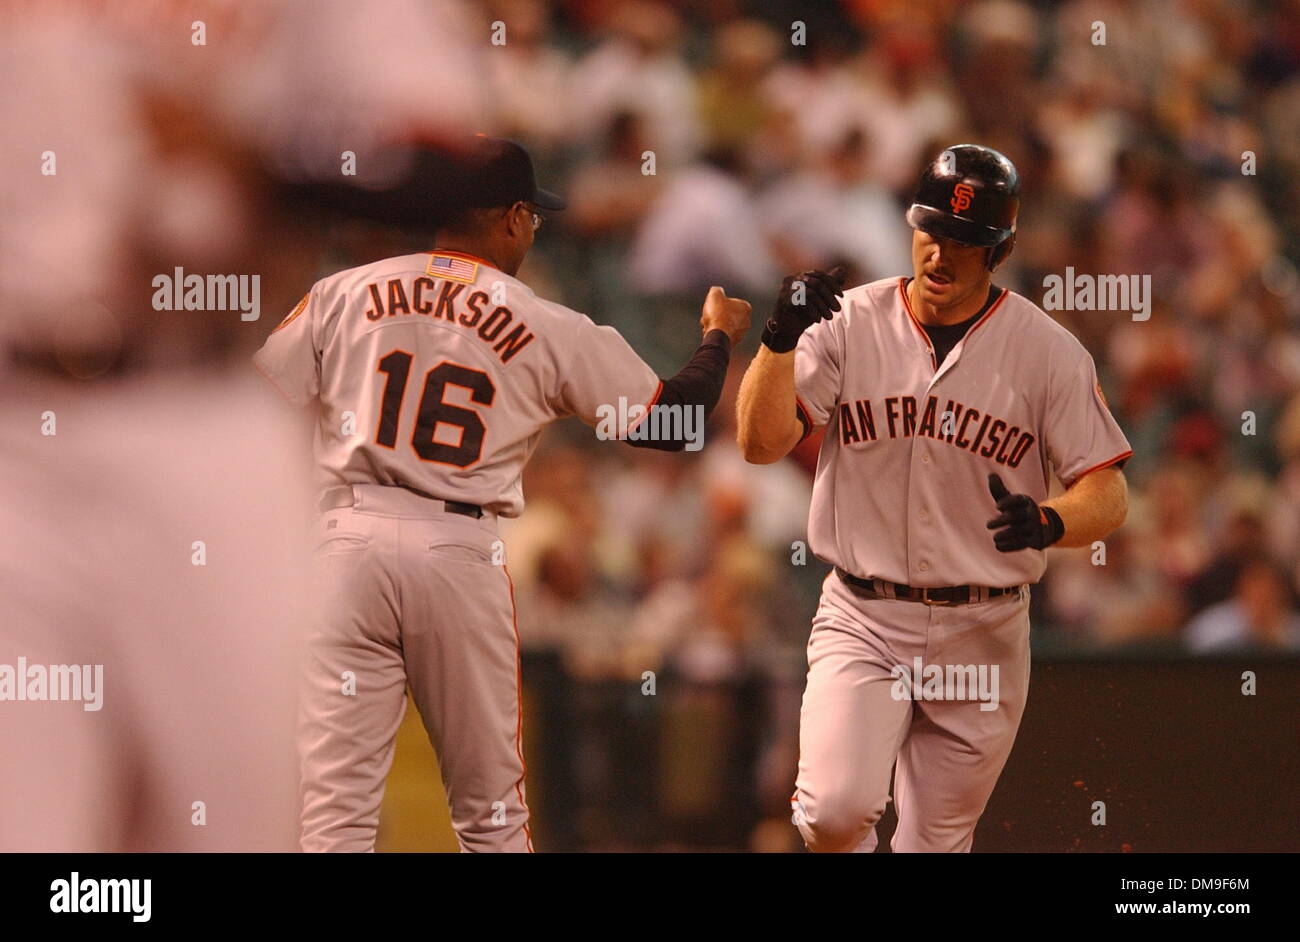 San Francisco Giant Jeff Kent rounds third, and 3rd base coach Sonny  Jackson in the 1st inning after hitting a 2 run homerun giving the Giants a  2-0 lead in the Giants/Astros